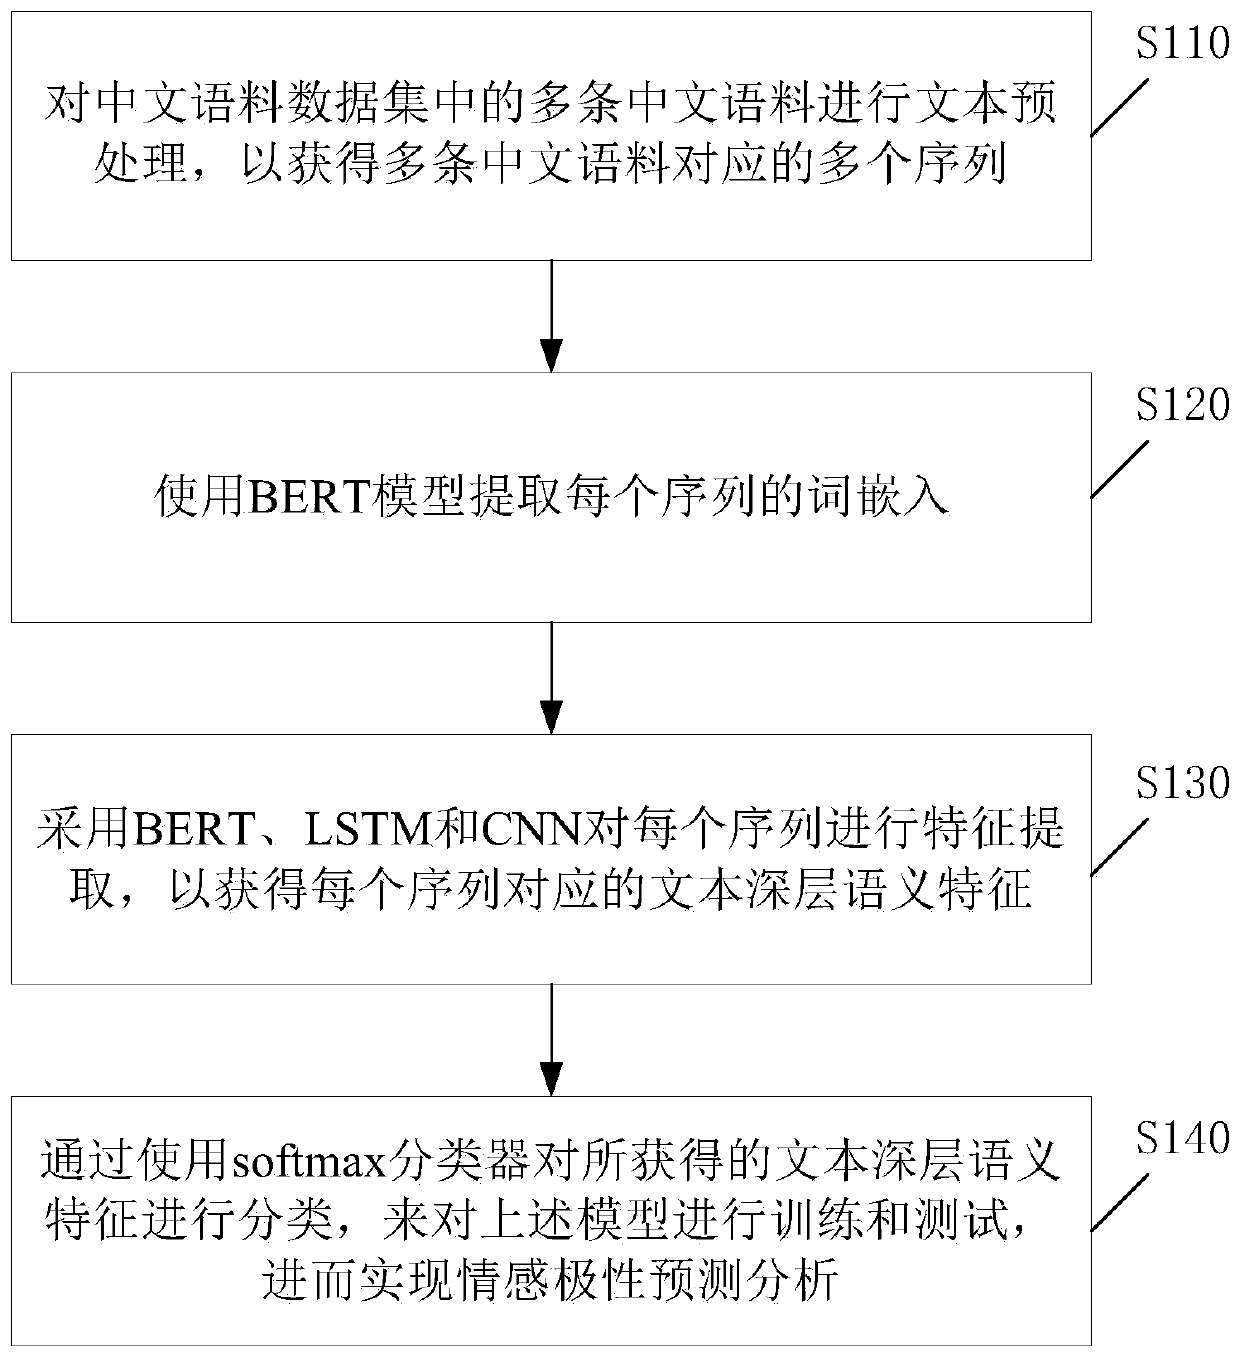 Chinese sentiment analysis method based on BERT, LSTM and CNN fusion